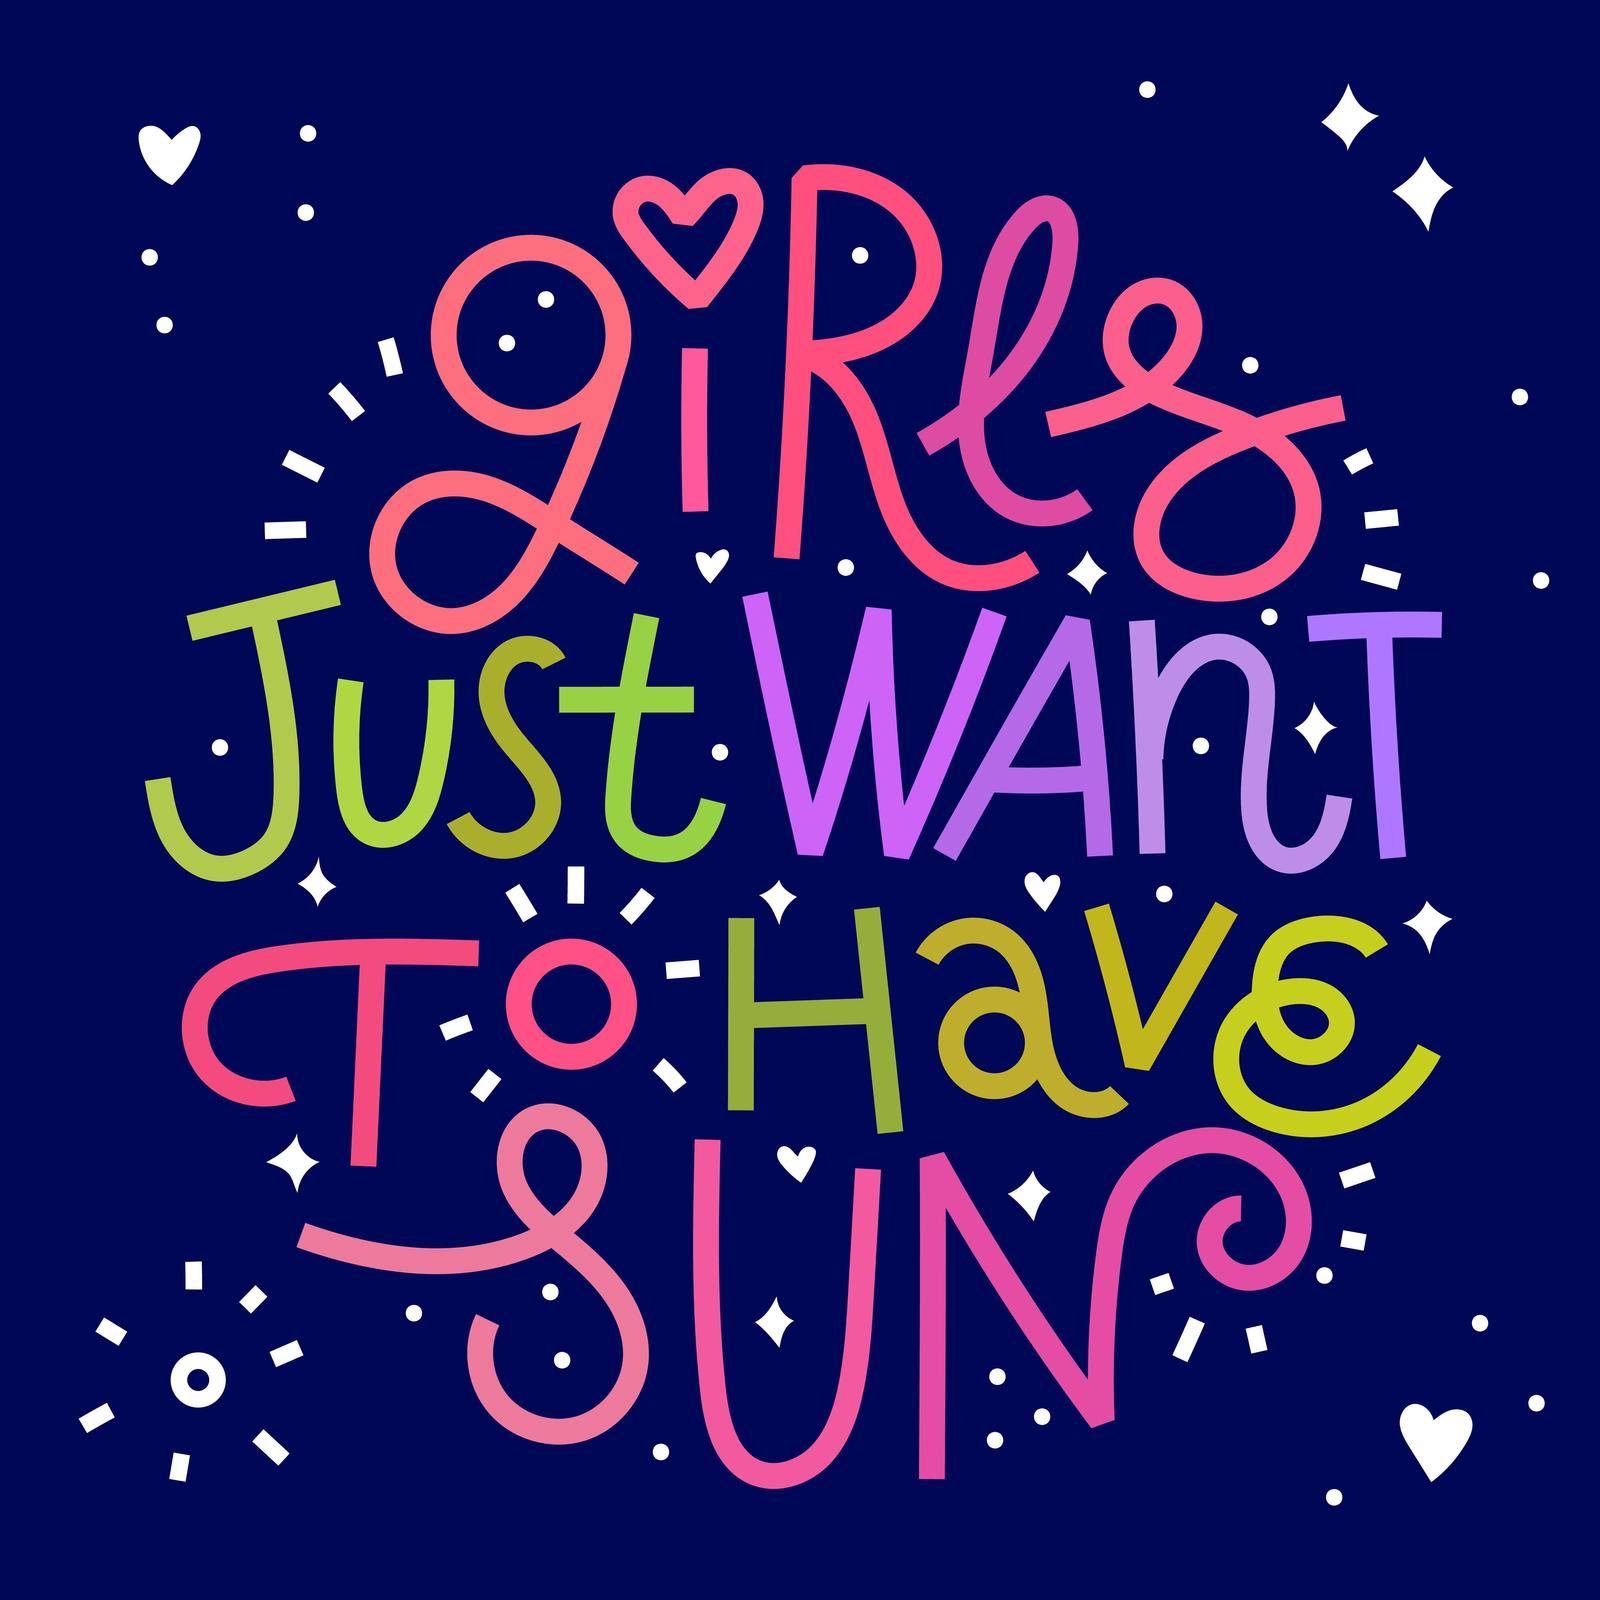 Beauty quote. Girls just want to have sun by chickfishdoodles